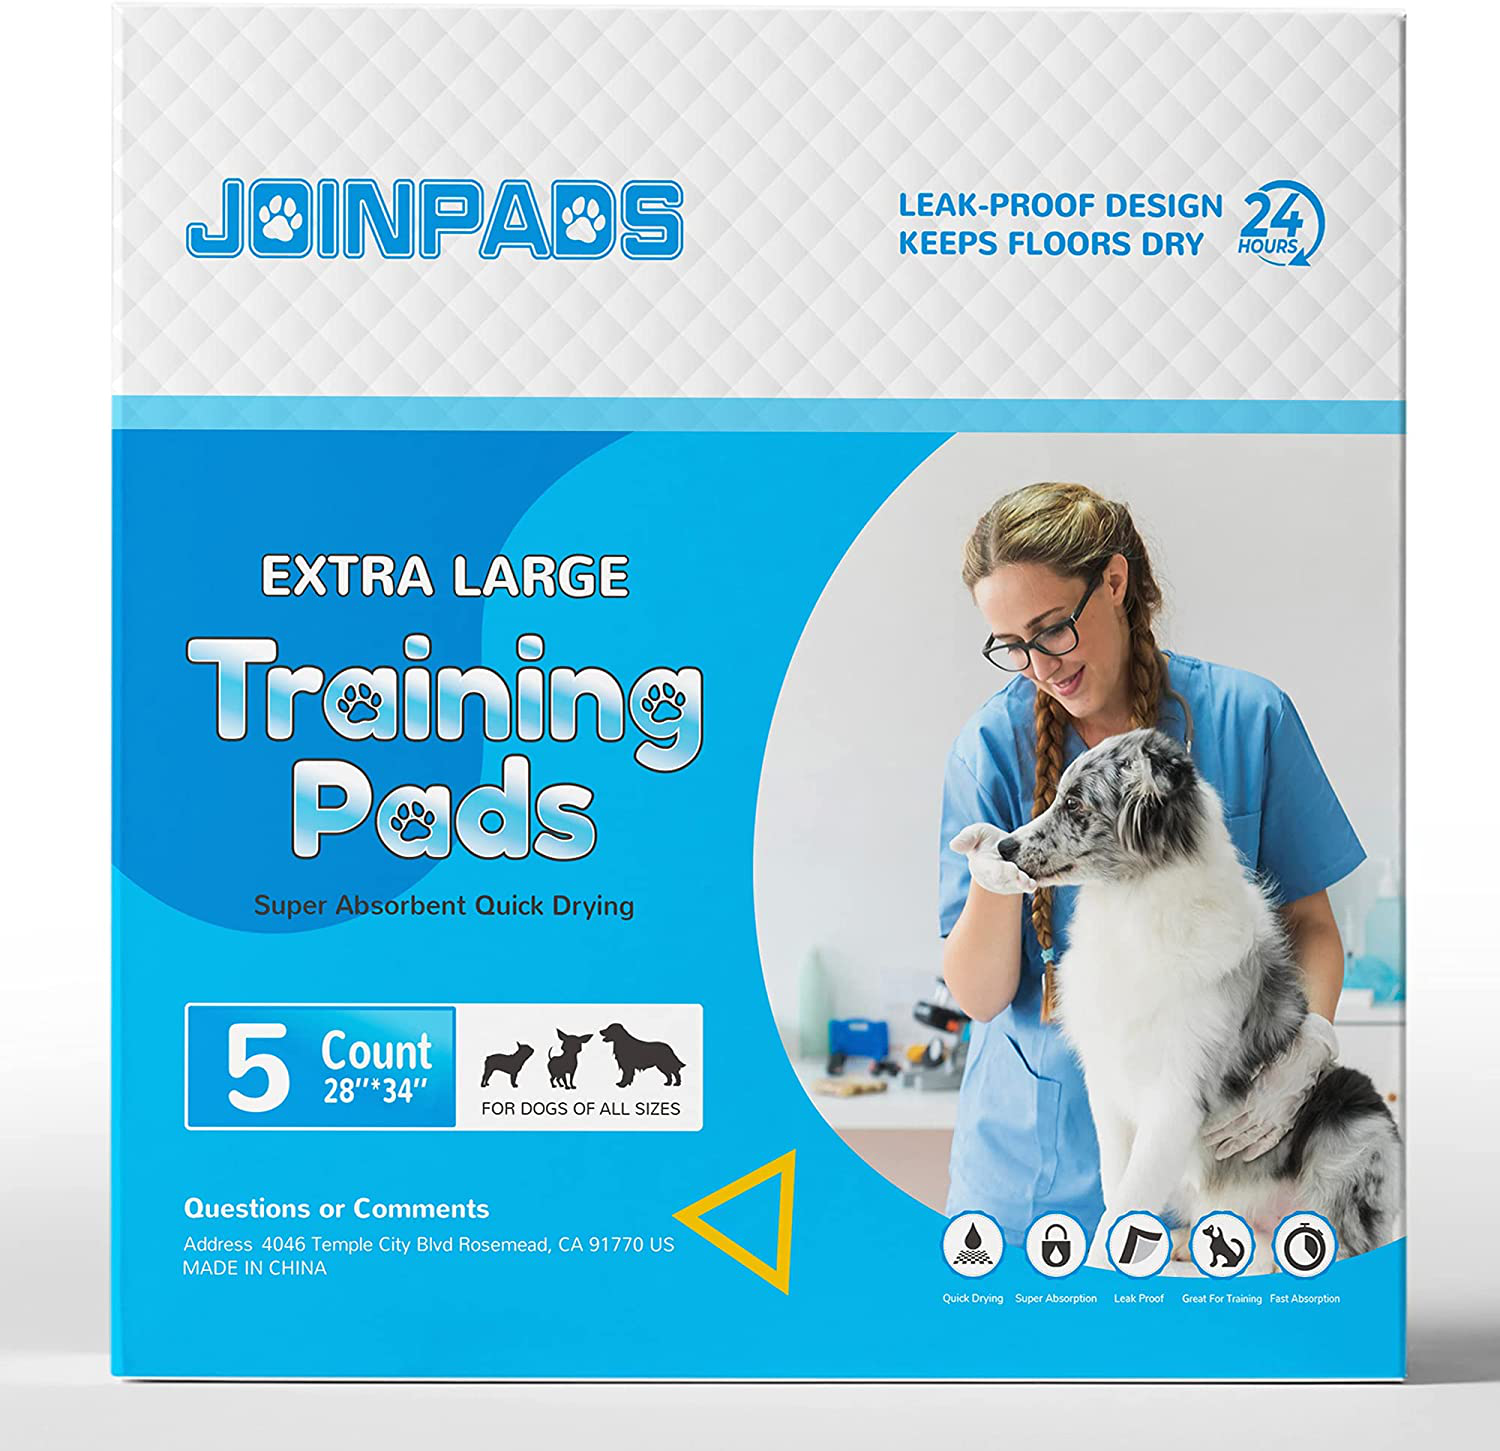 JOINPADS Dog Pee Pad, Puppy Potty Training Pet Pads Dog Pads Extra Large Disposable Super Absorbent & Leak-Free Pee Pads 28"X34"